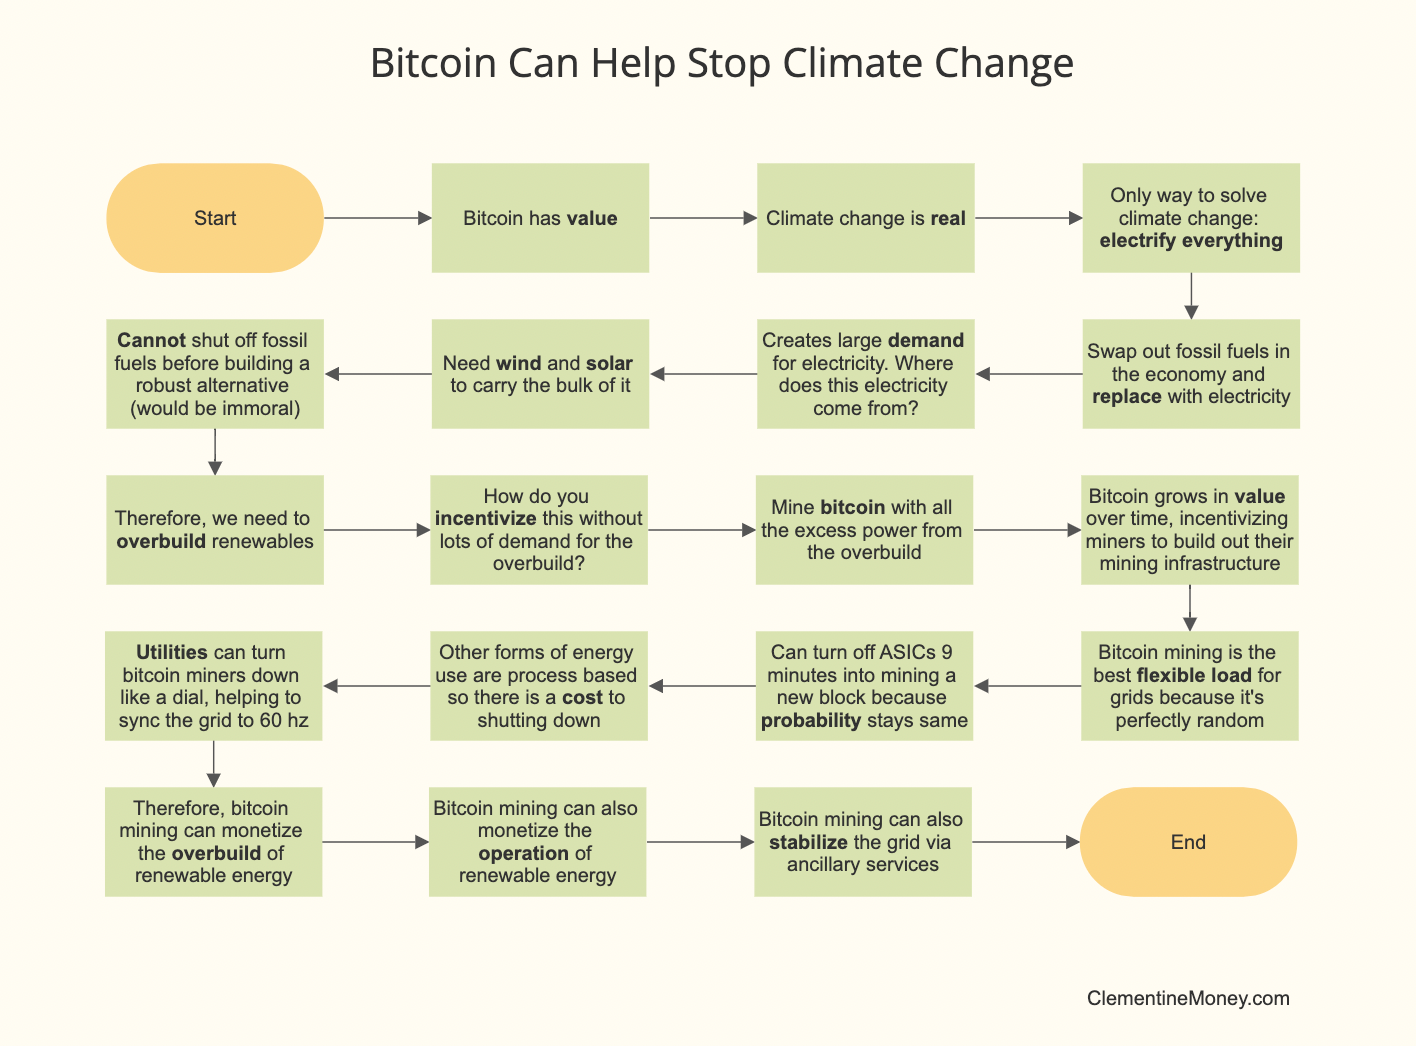 Why Should You Care About Bitcoin? (Part 2)